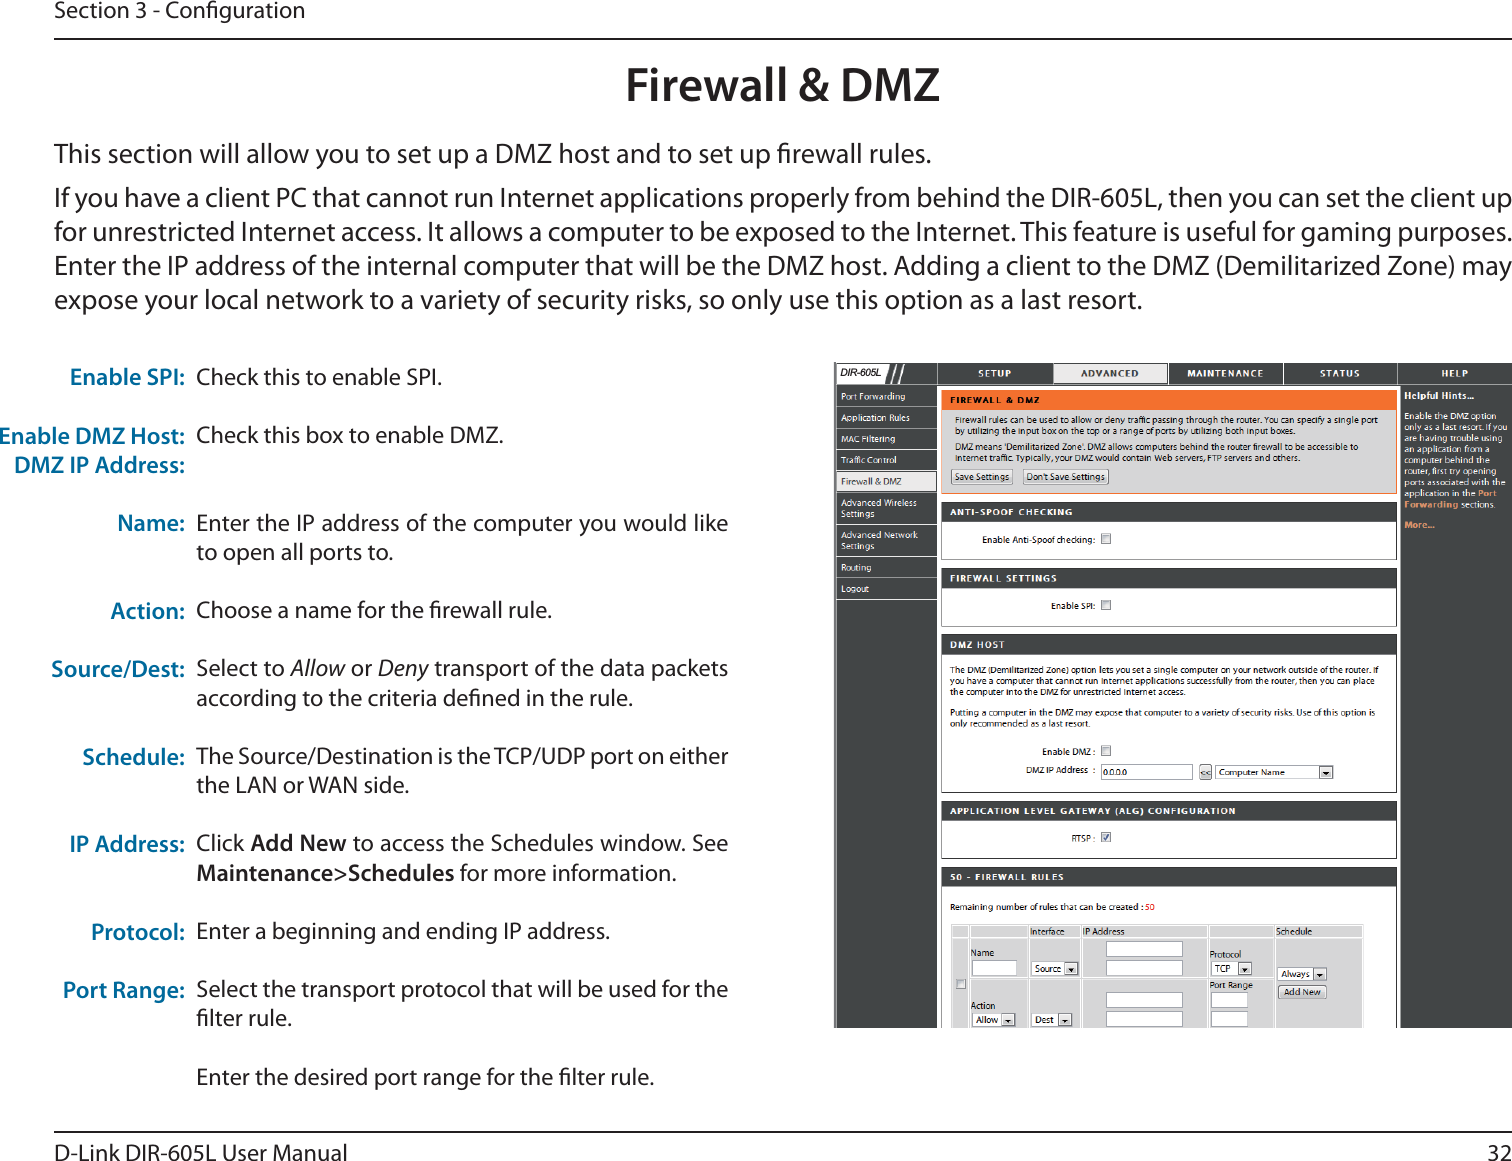 32D-Link DIR-605L User ManualSection 3 - CongurationFirewall &amp; DMZThis section will allow you to set up a DMZ host and to set up rewall rules.If you have a client PC that cannot run Internet applications properly from behind the DIR-605L, then you can set the client up for unrestricted Internet access. It allows a computer to be exposed to the Internet. This feature is useful for gaming purposes. Enter the IP address of the internal computer that will be the DMZ host. Adding a client to the DMZ (Demilitarized Zone) may expose your local network to a variety of security risks, so only use this option as a last resort.Check this to enable SPI.Check this box to enable DMZ.Enter the IP address of the computer you would like to open all ports to.Choose a name for the rewall rule.Select to Allow or Deny transport of the data packets according to the criteria dened in the rule. The Source/Destination is the TCP/UDP port on either the LAN or WAN side.Click Add New to access the Schedules window. See Maintenance&gt;Schedules for more information.Enter a beginning and ending IP address.Select the transport protocol that will be used for the lter rule.Enter the desired port range for the lter rule.Enable DMZ Host:DMZ IP Address:Name:Action:Source/Dest:Schedule:IP Address:Protocol:Port Range: Enable SPI:    &apos;,5/